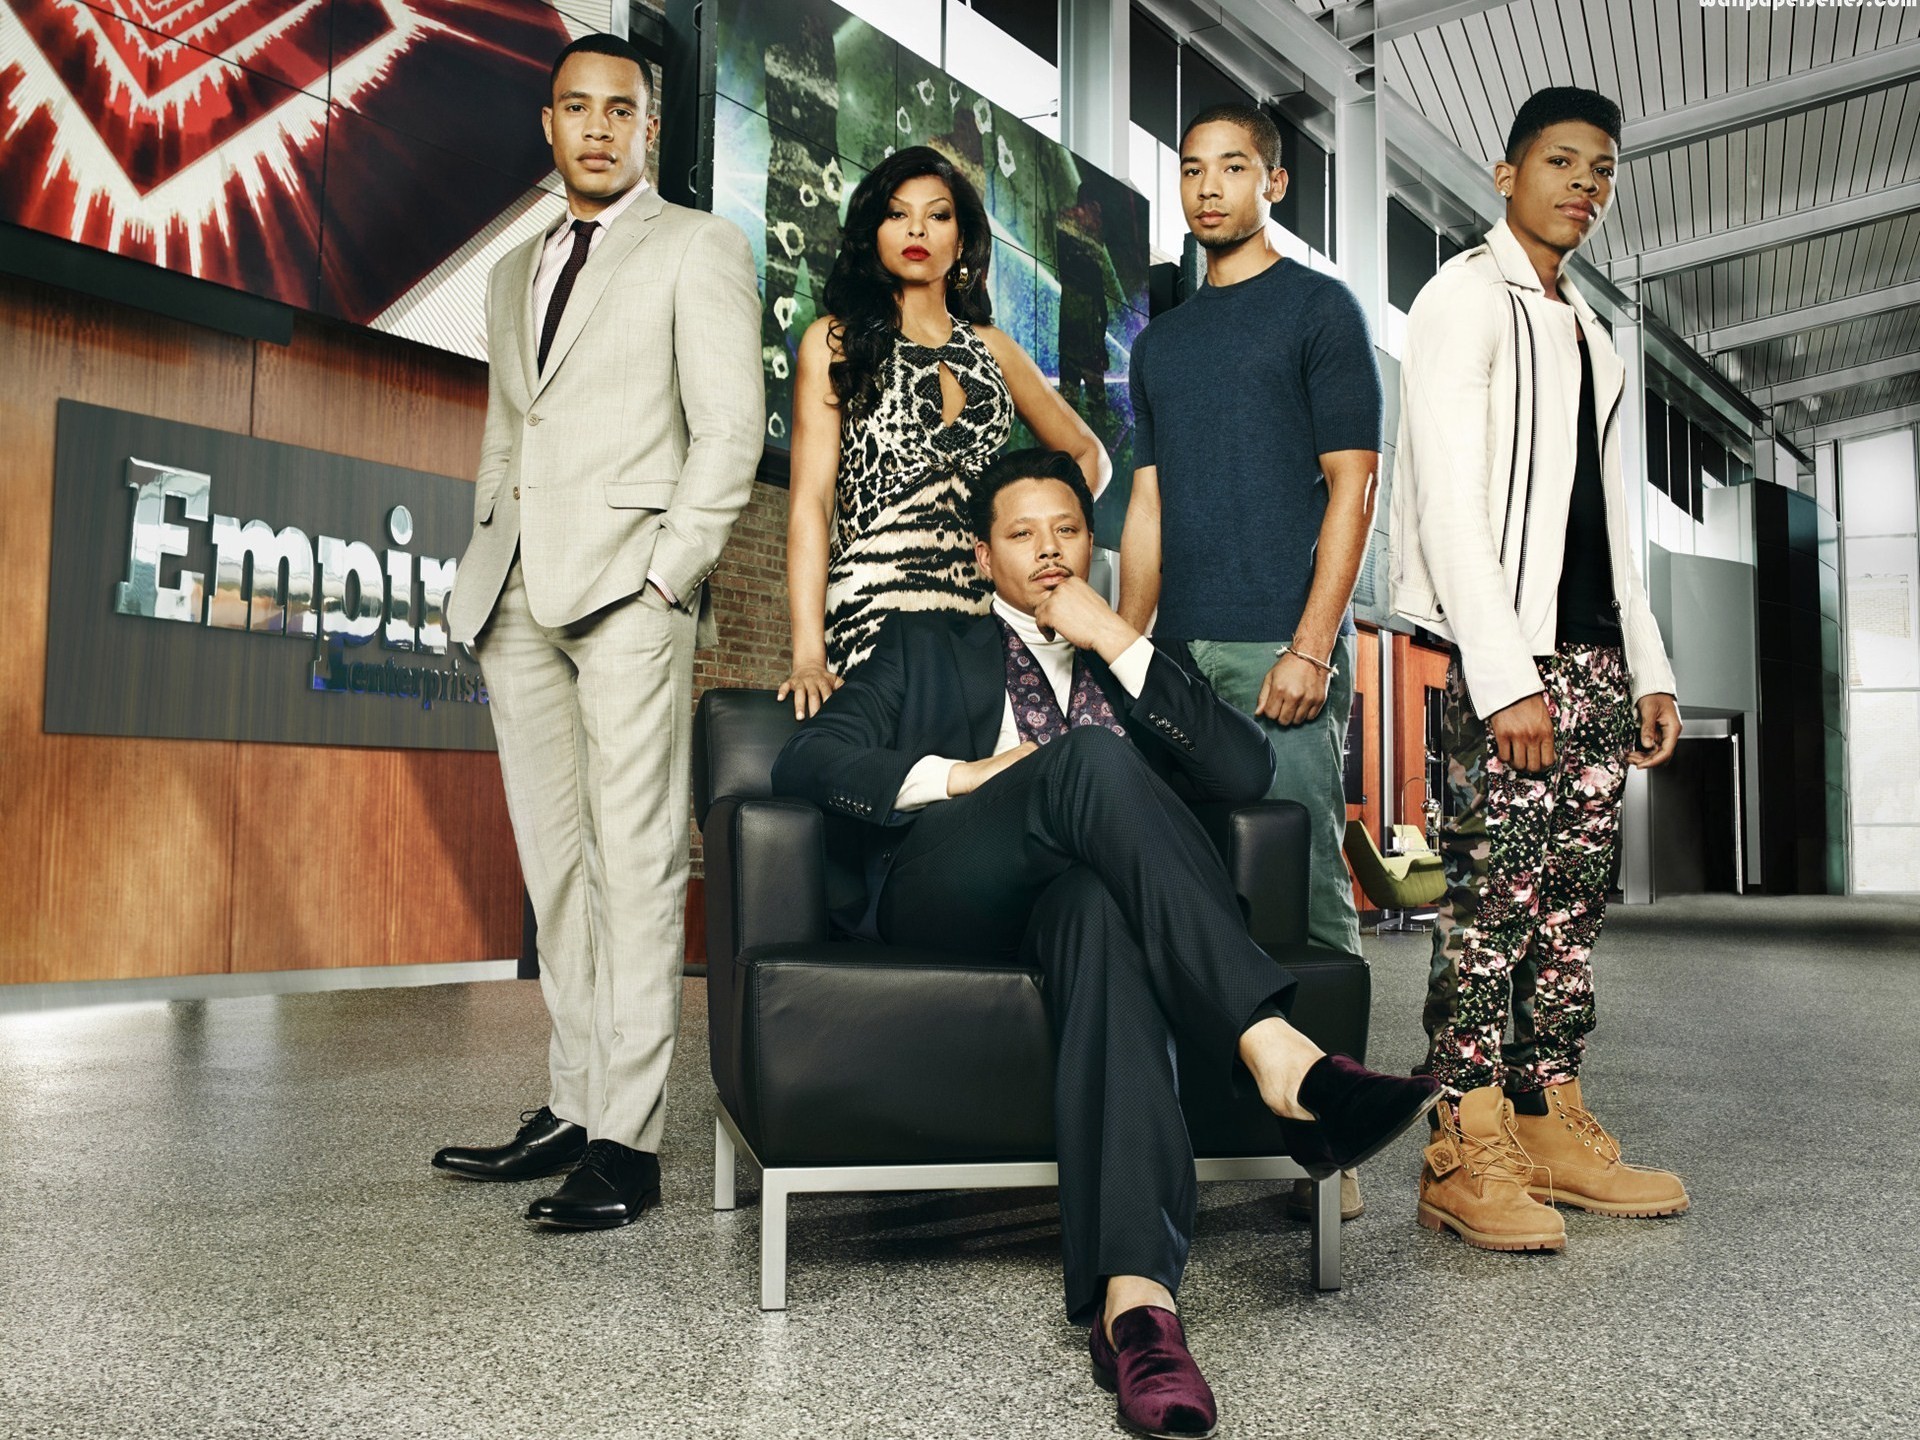 1920x1440 ... Empire TV Series Wallpapers HD ...